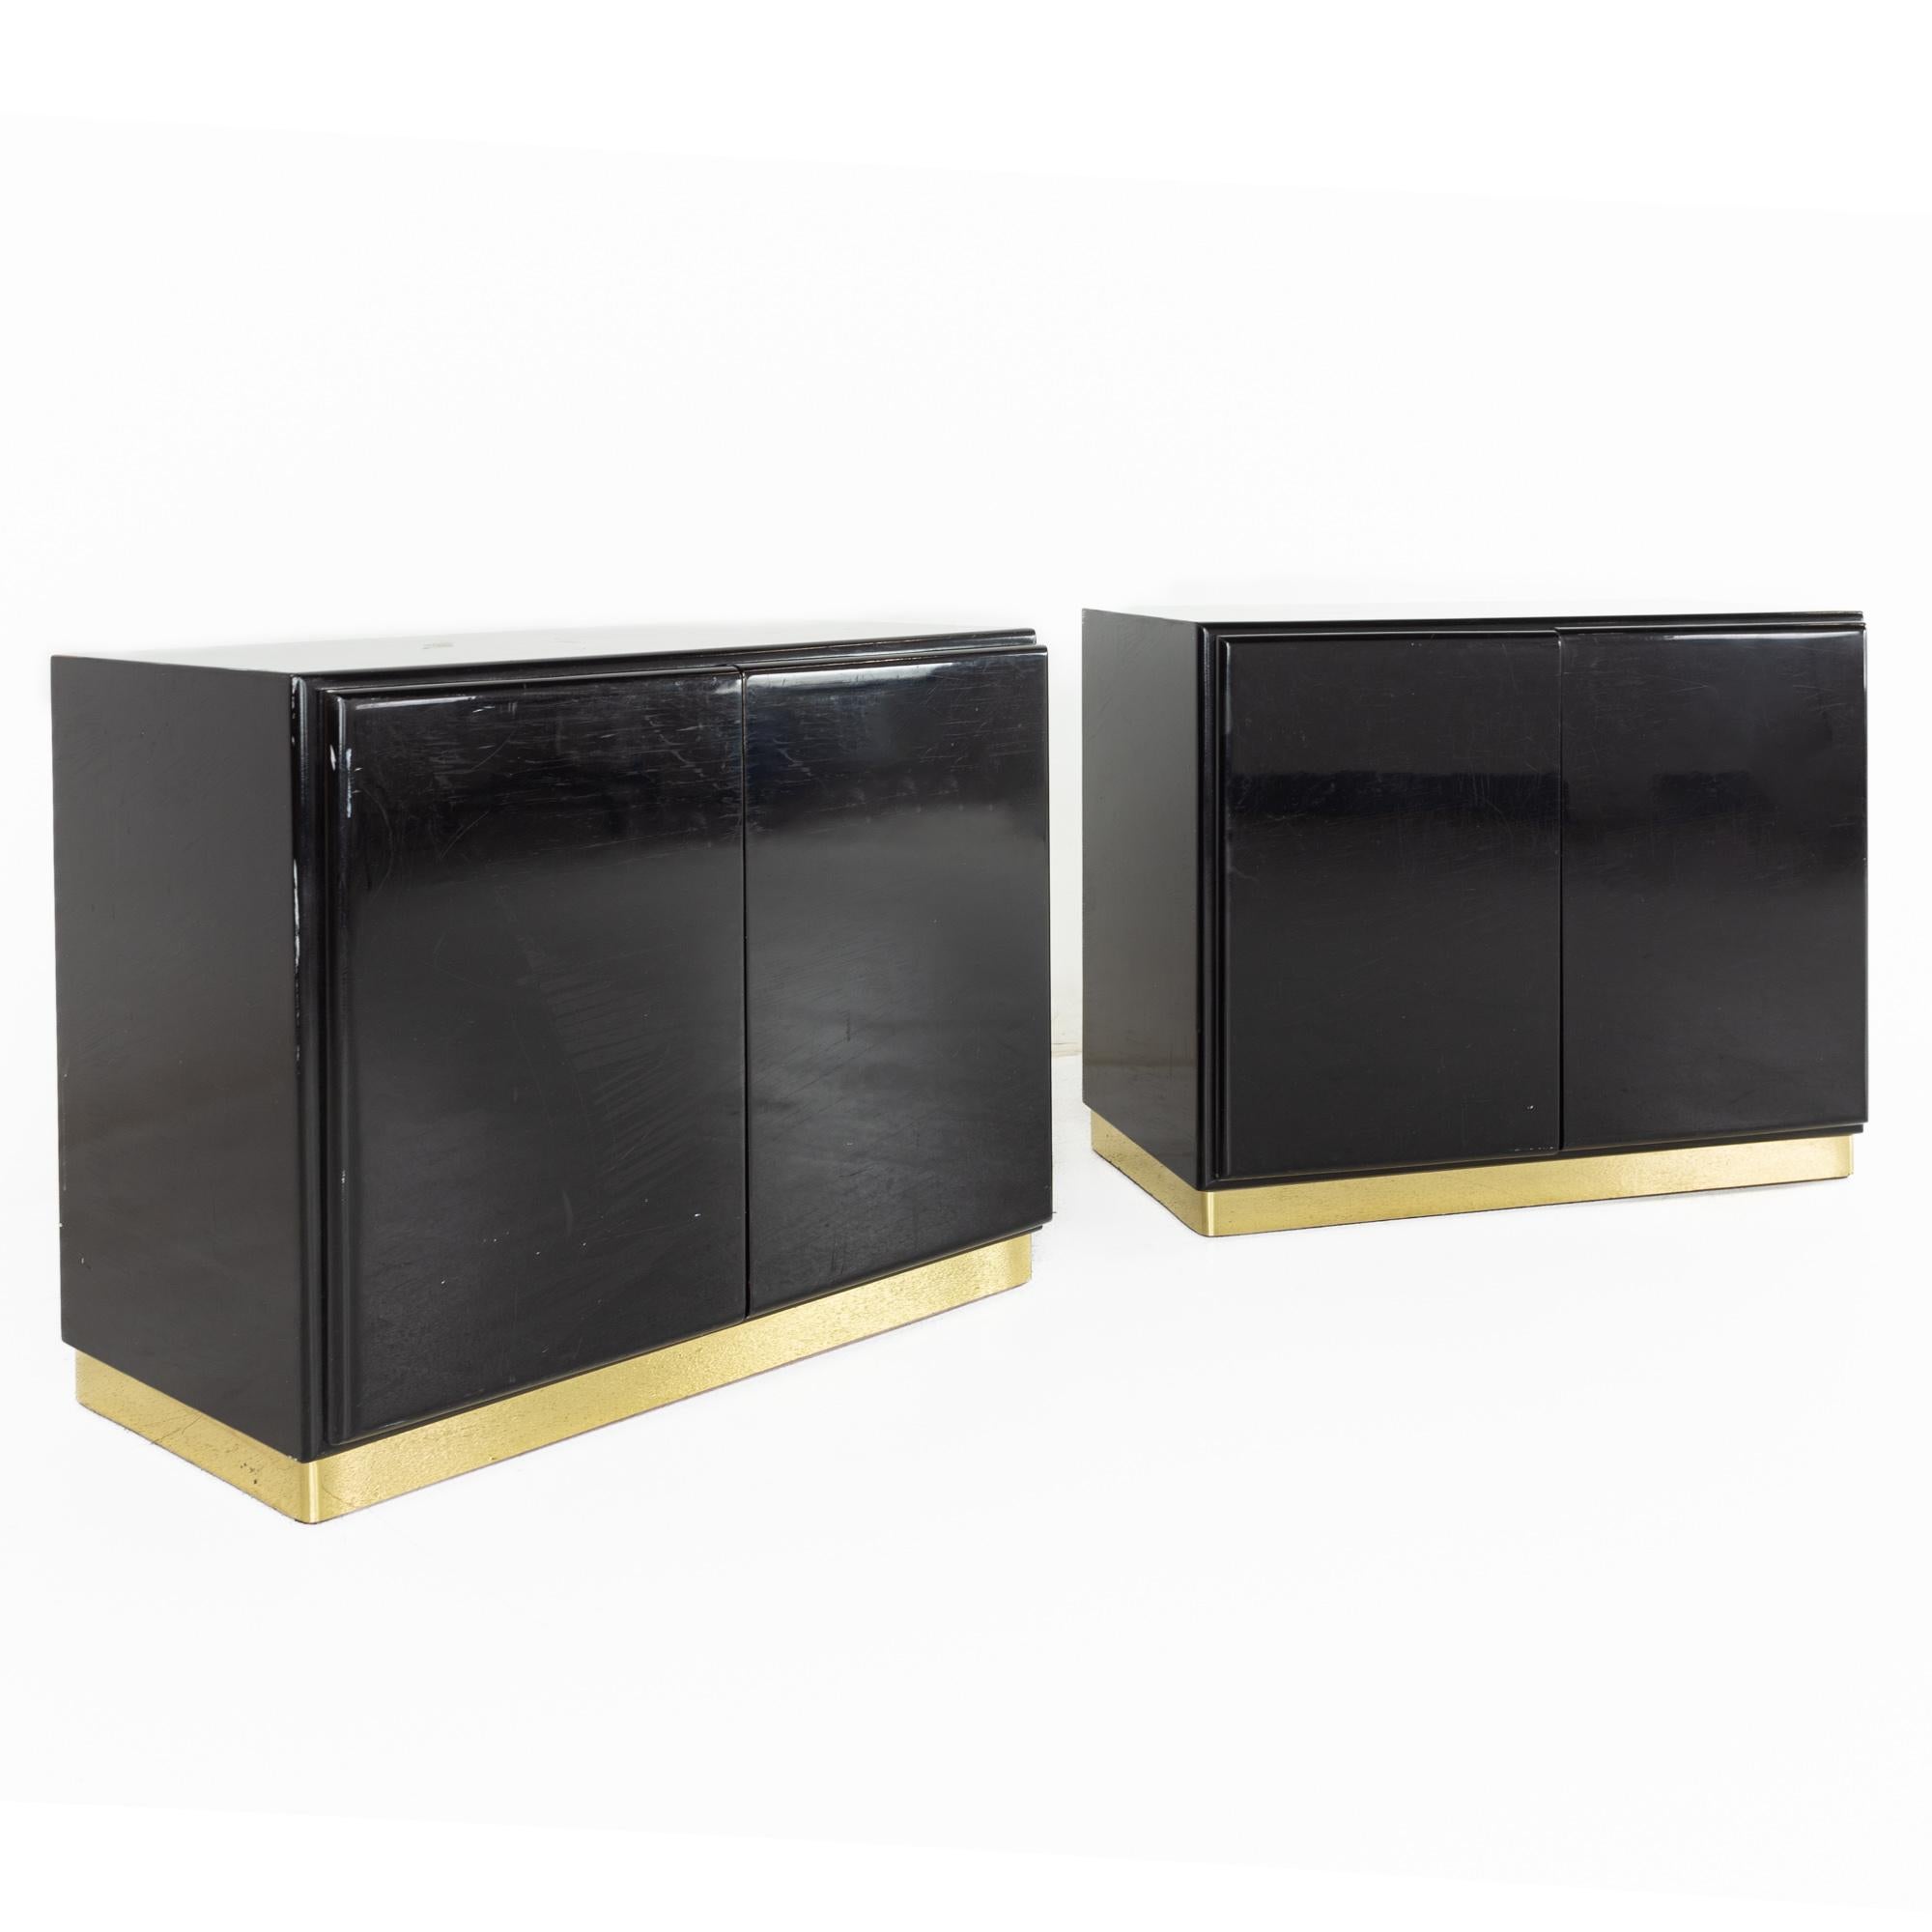 Milo Baughman for Thayer Coggin mid century black lacquer and brass nightstands - pair

Each nightstand measures: 32 wide x 18 deep x 26 inches high

All pieces of furniture can be had in what we call restored vintage condition. That means the